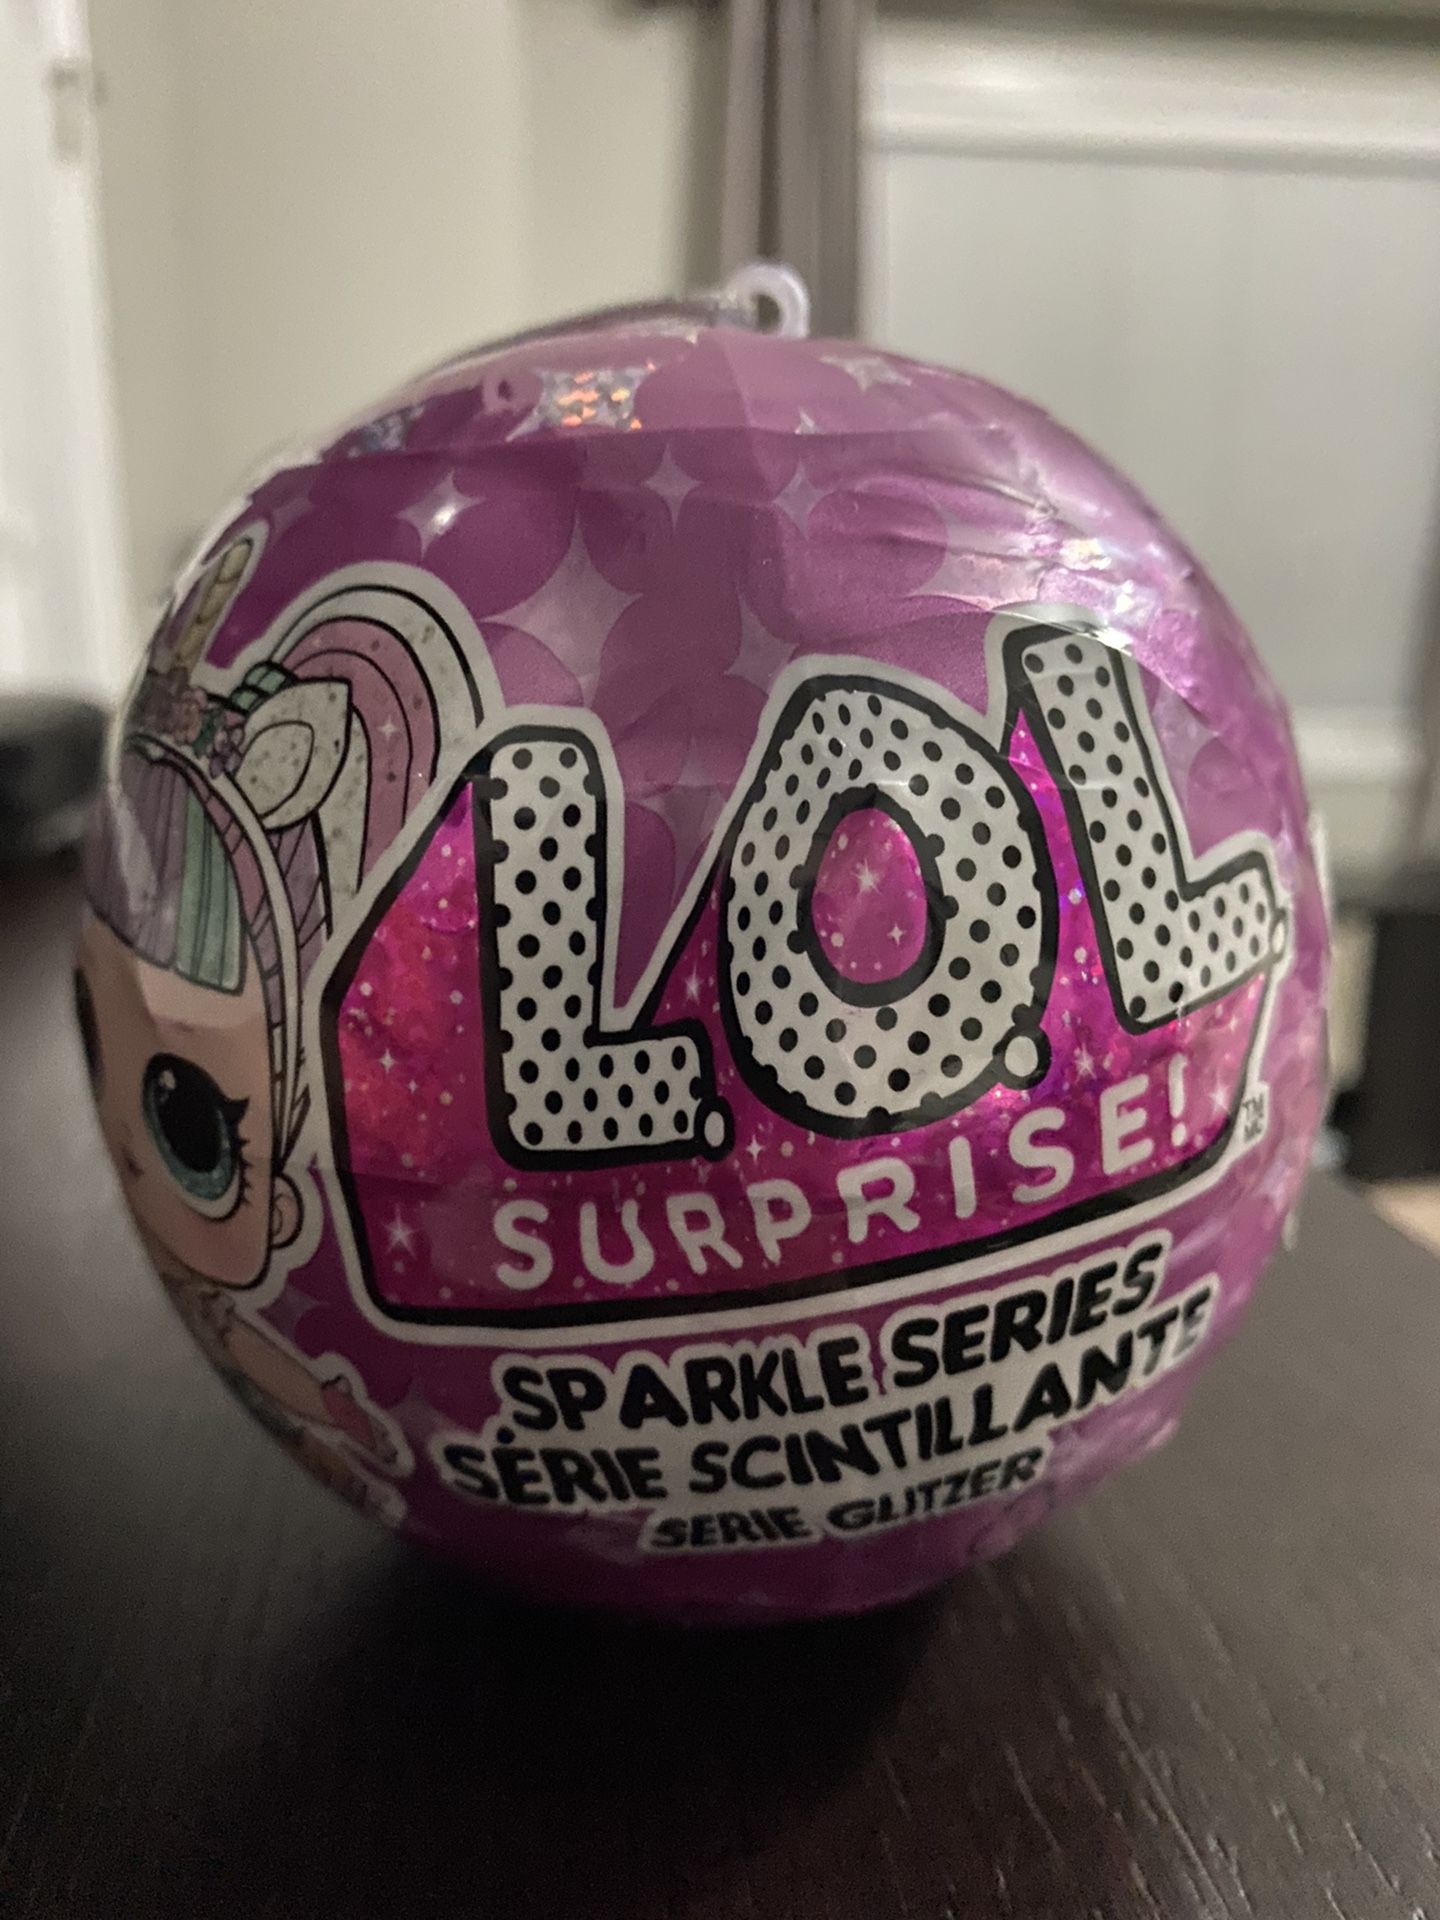 LOL Surprise Doll Sparkle Series 100% Authentic New Sealed 1 Ball